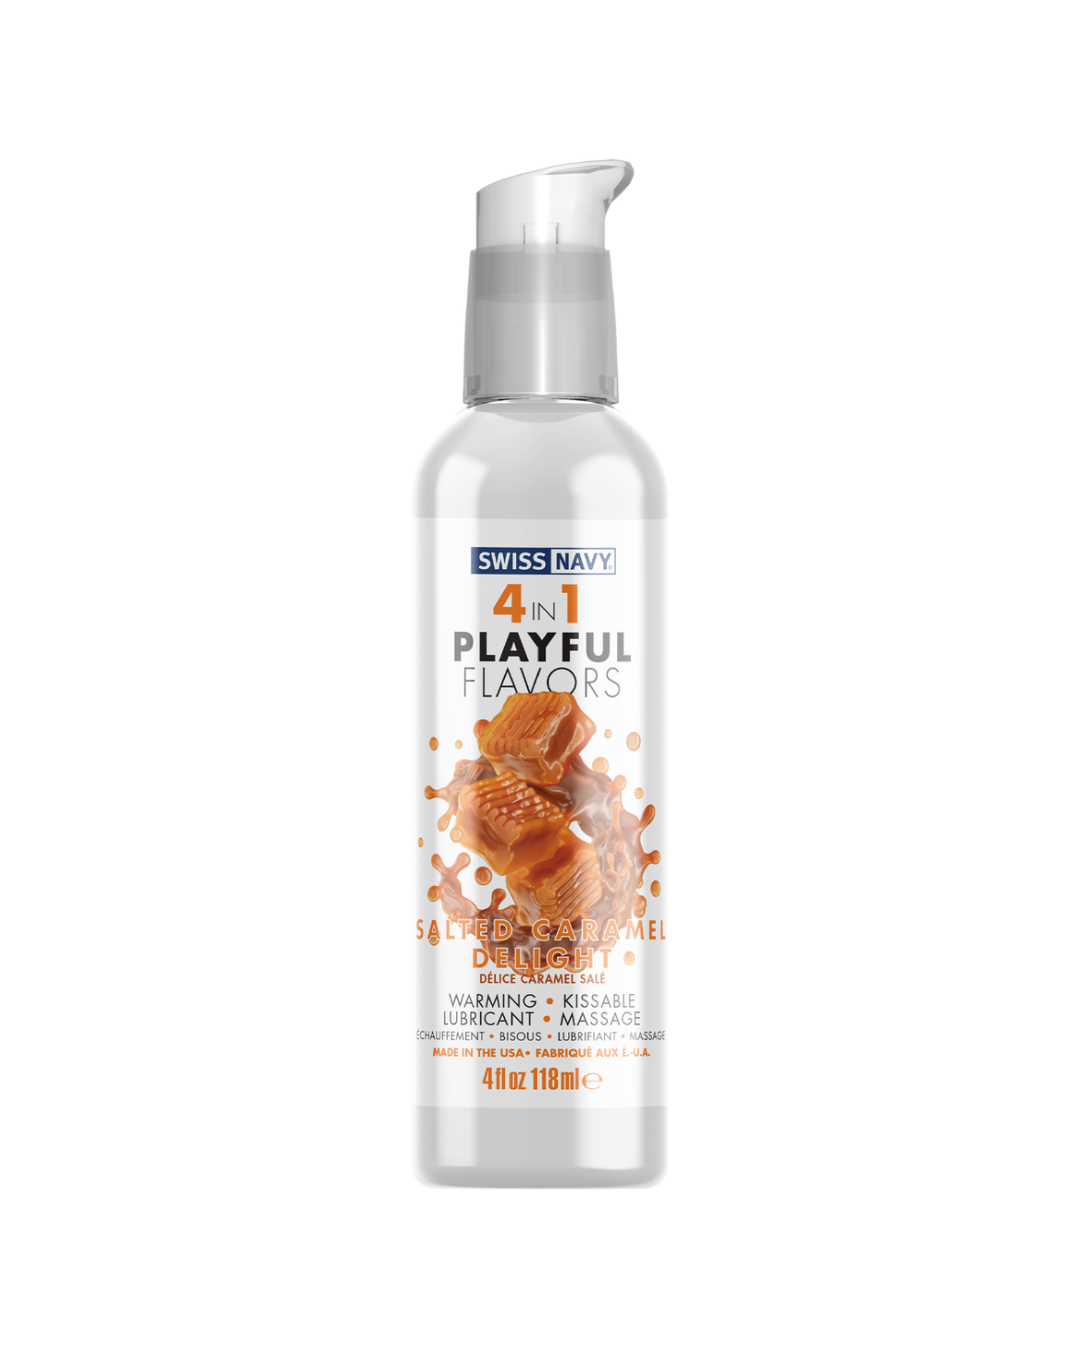 Playful Flavors Salted Caramel Delight 4 in 1 Warming Lubricant